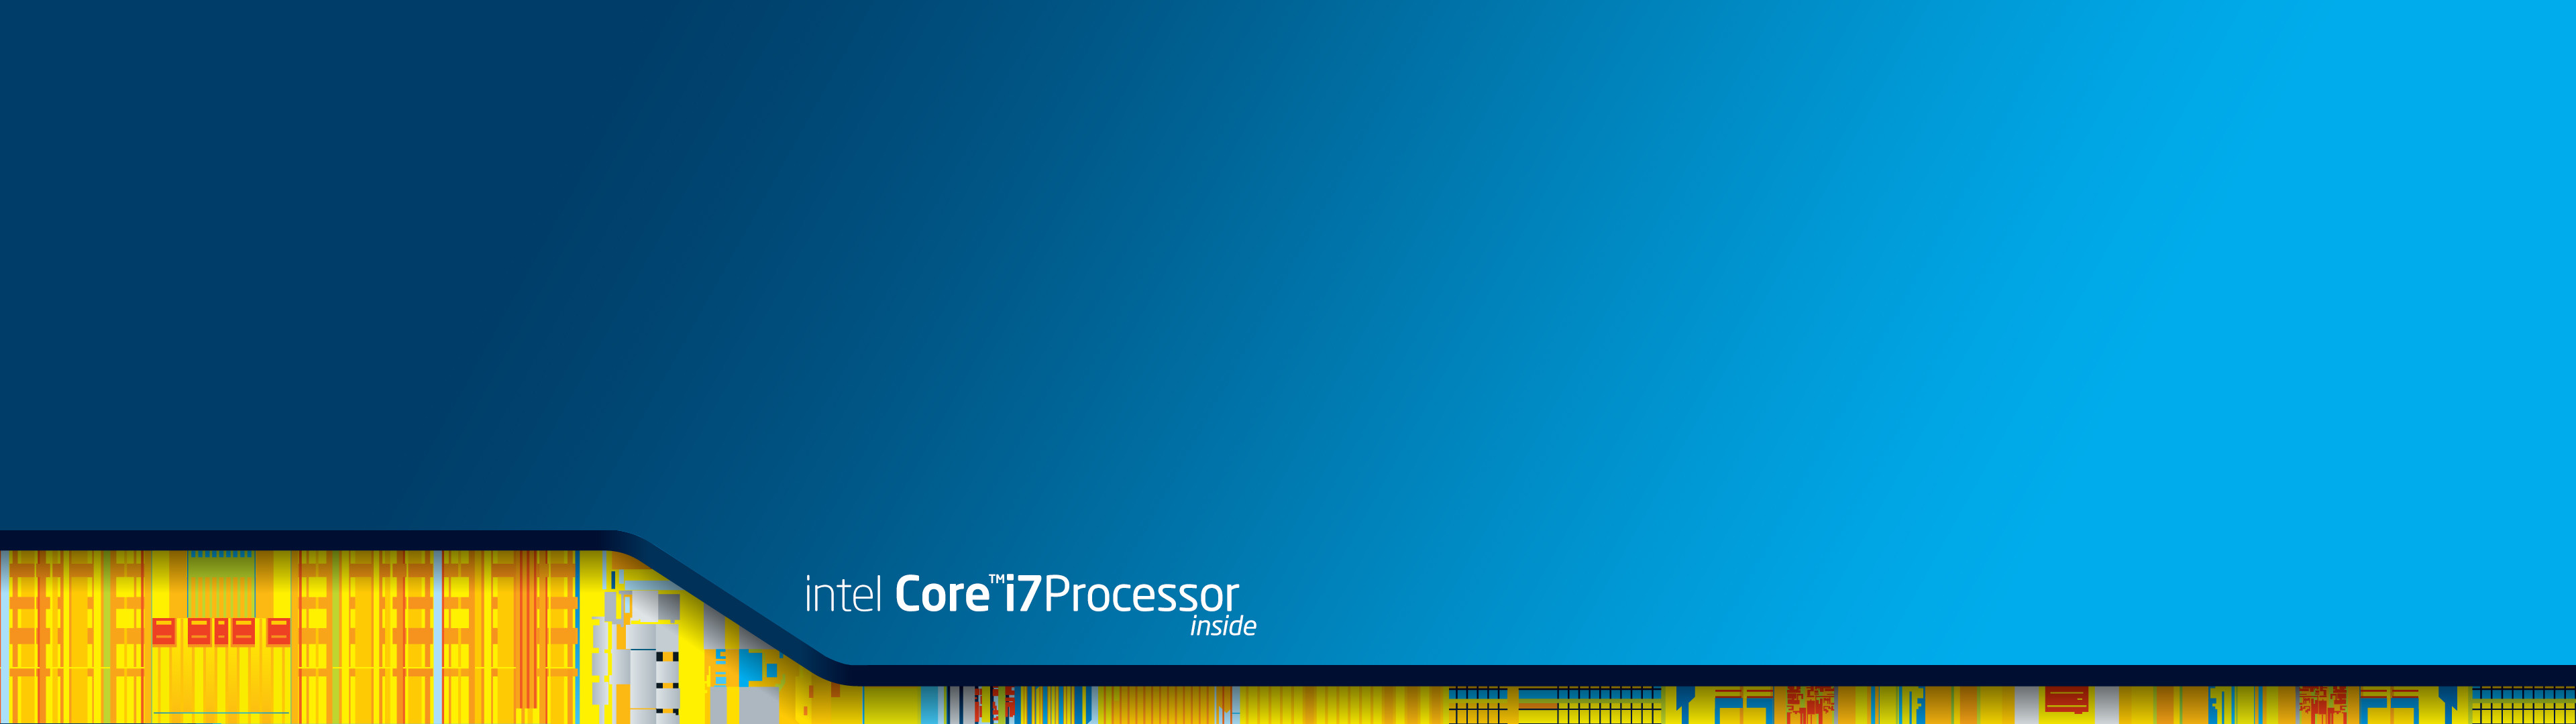 3840x1080 Intel i7 inspired  by psucow on DeviantArt Â· wallpaper lovers hd  ...